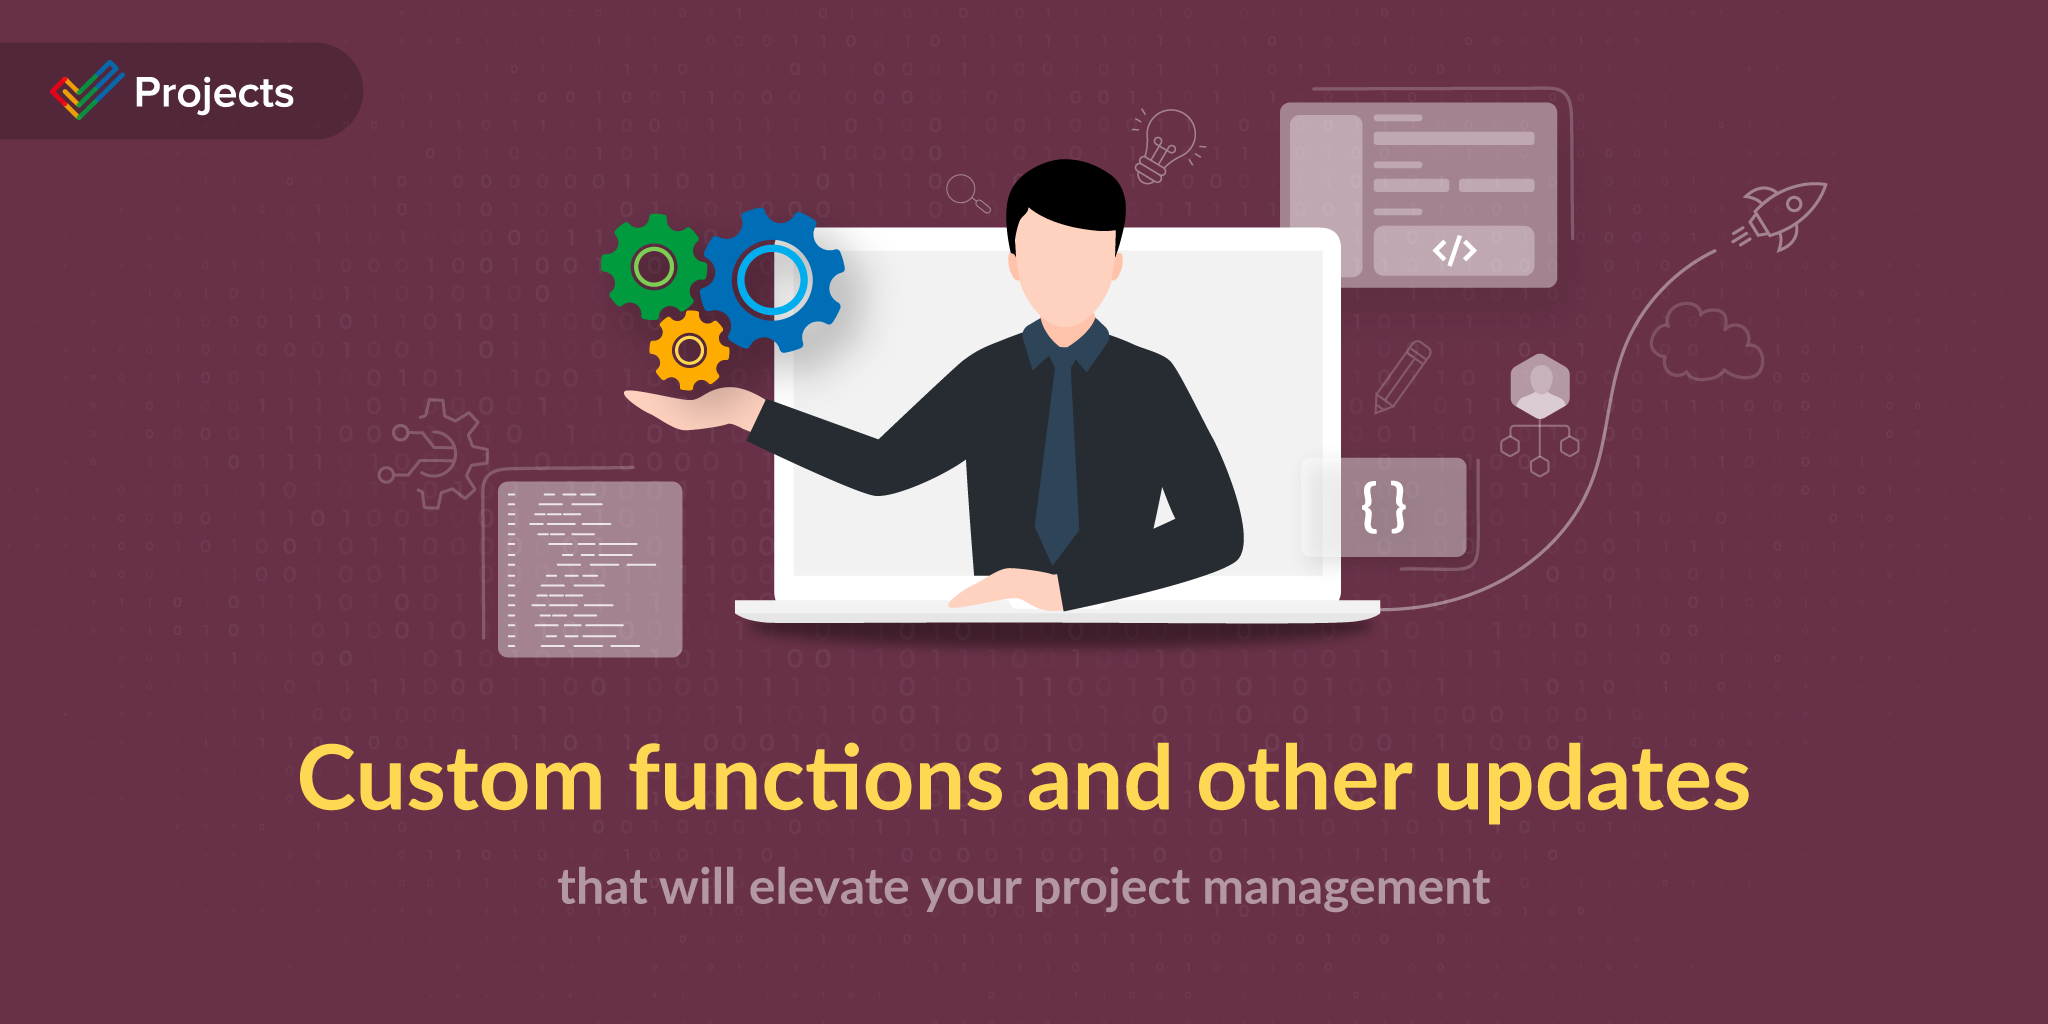 Custom functions and other updates that will elevate your project management